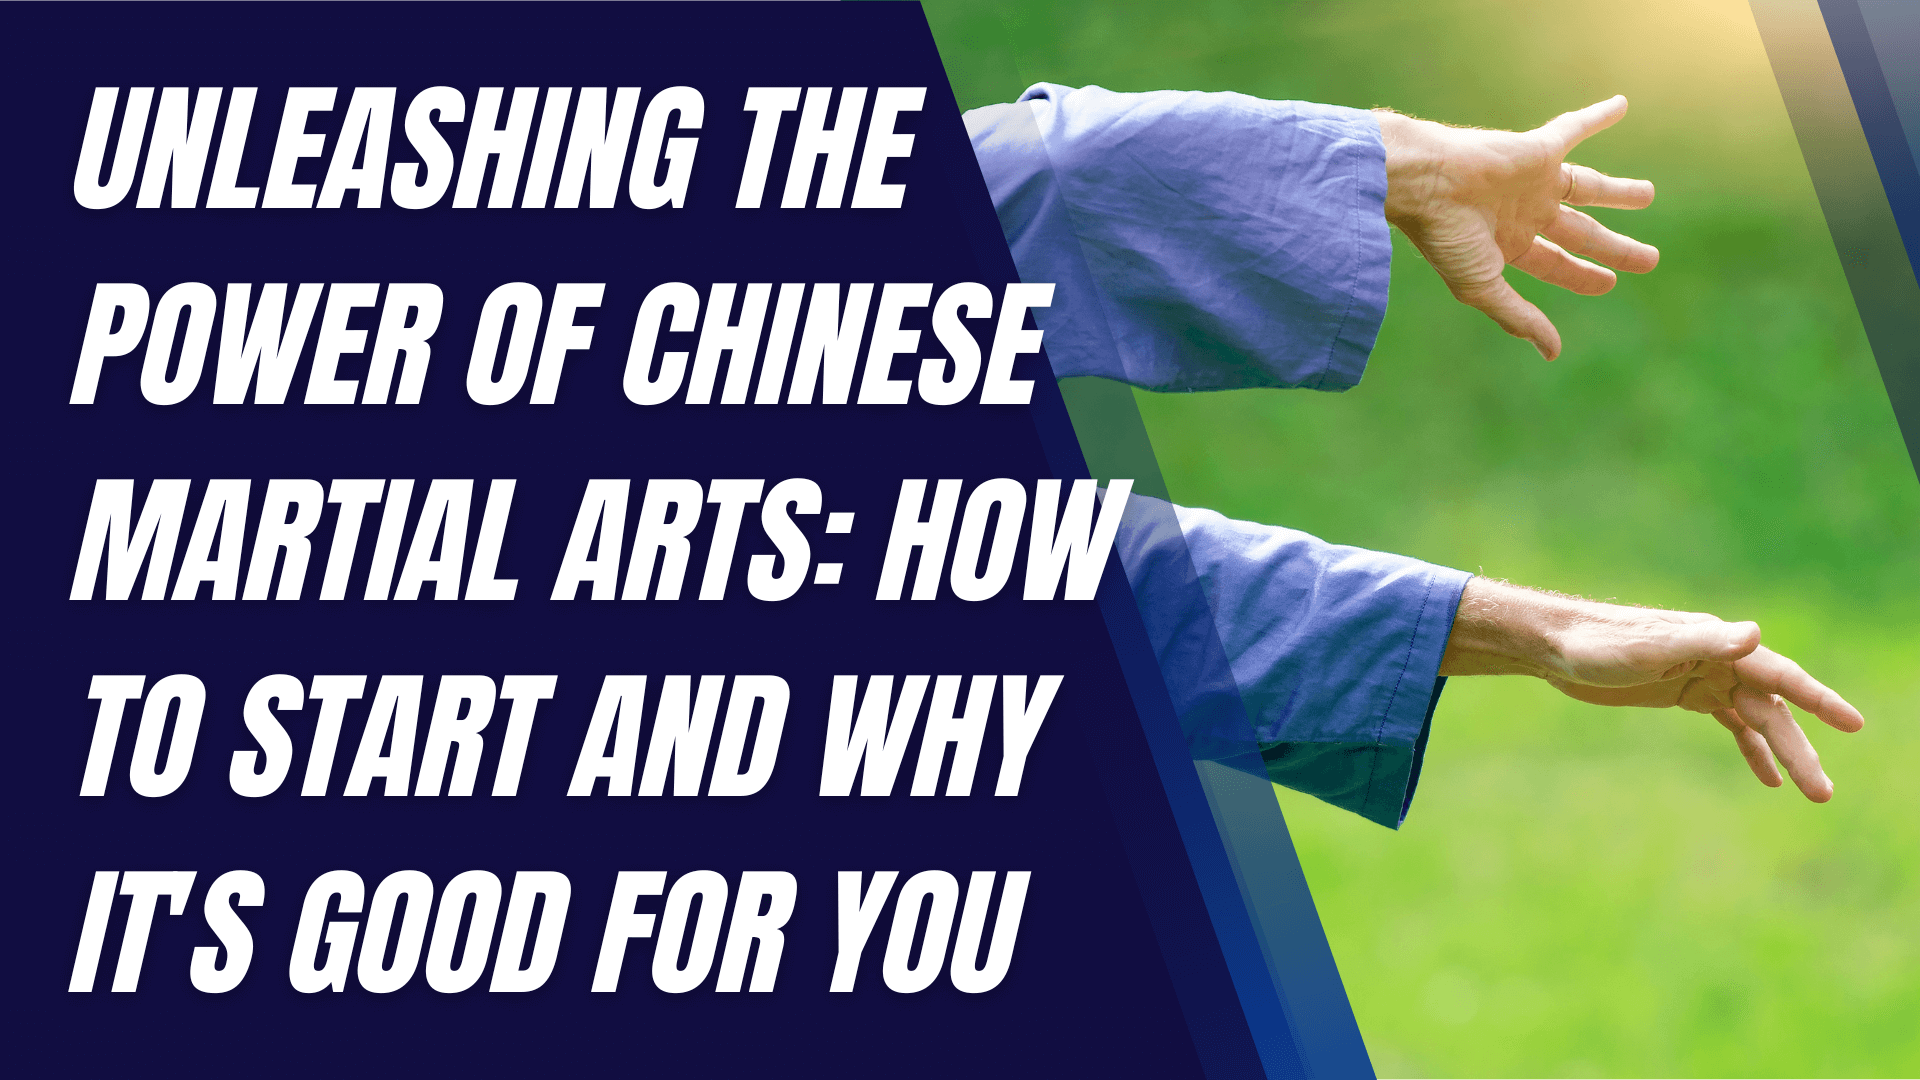 Unleashing the Power of Chinese Martial Arts: How to Start and Why It's Good for You